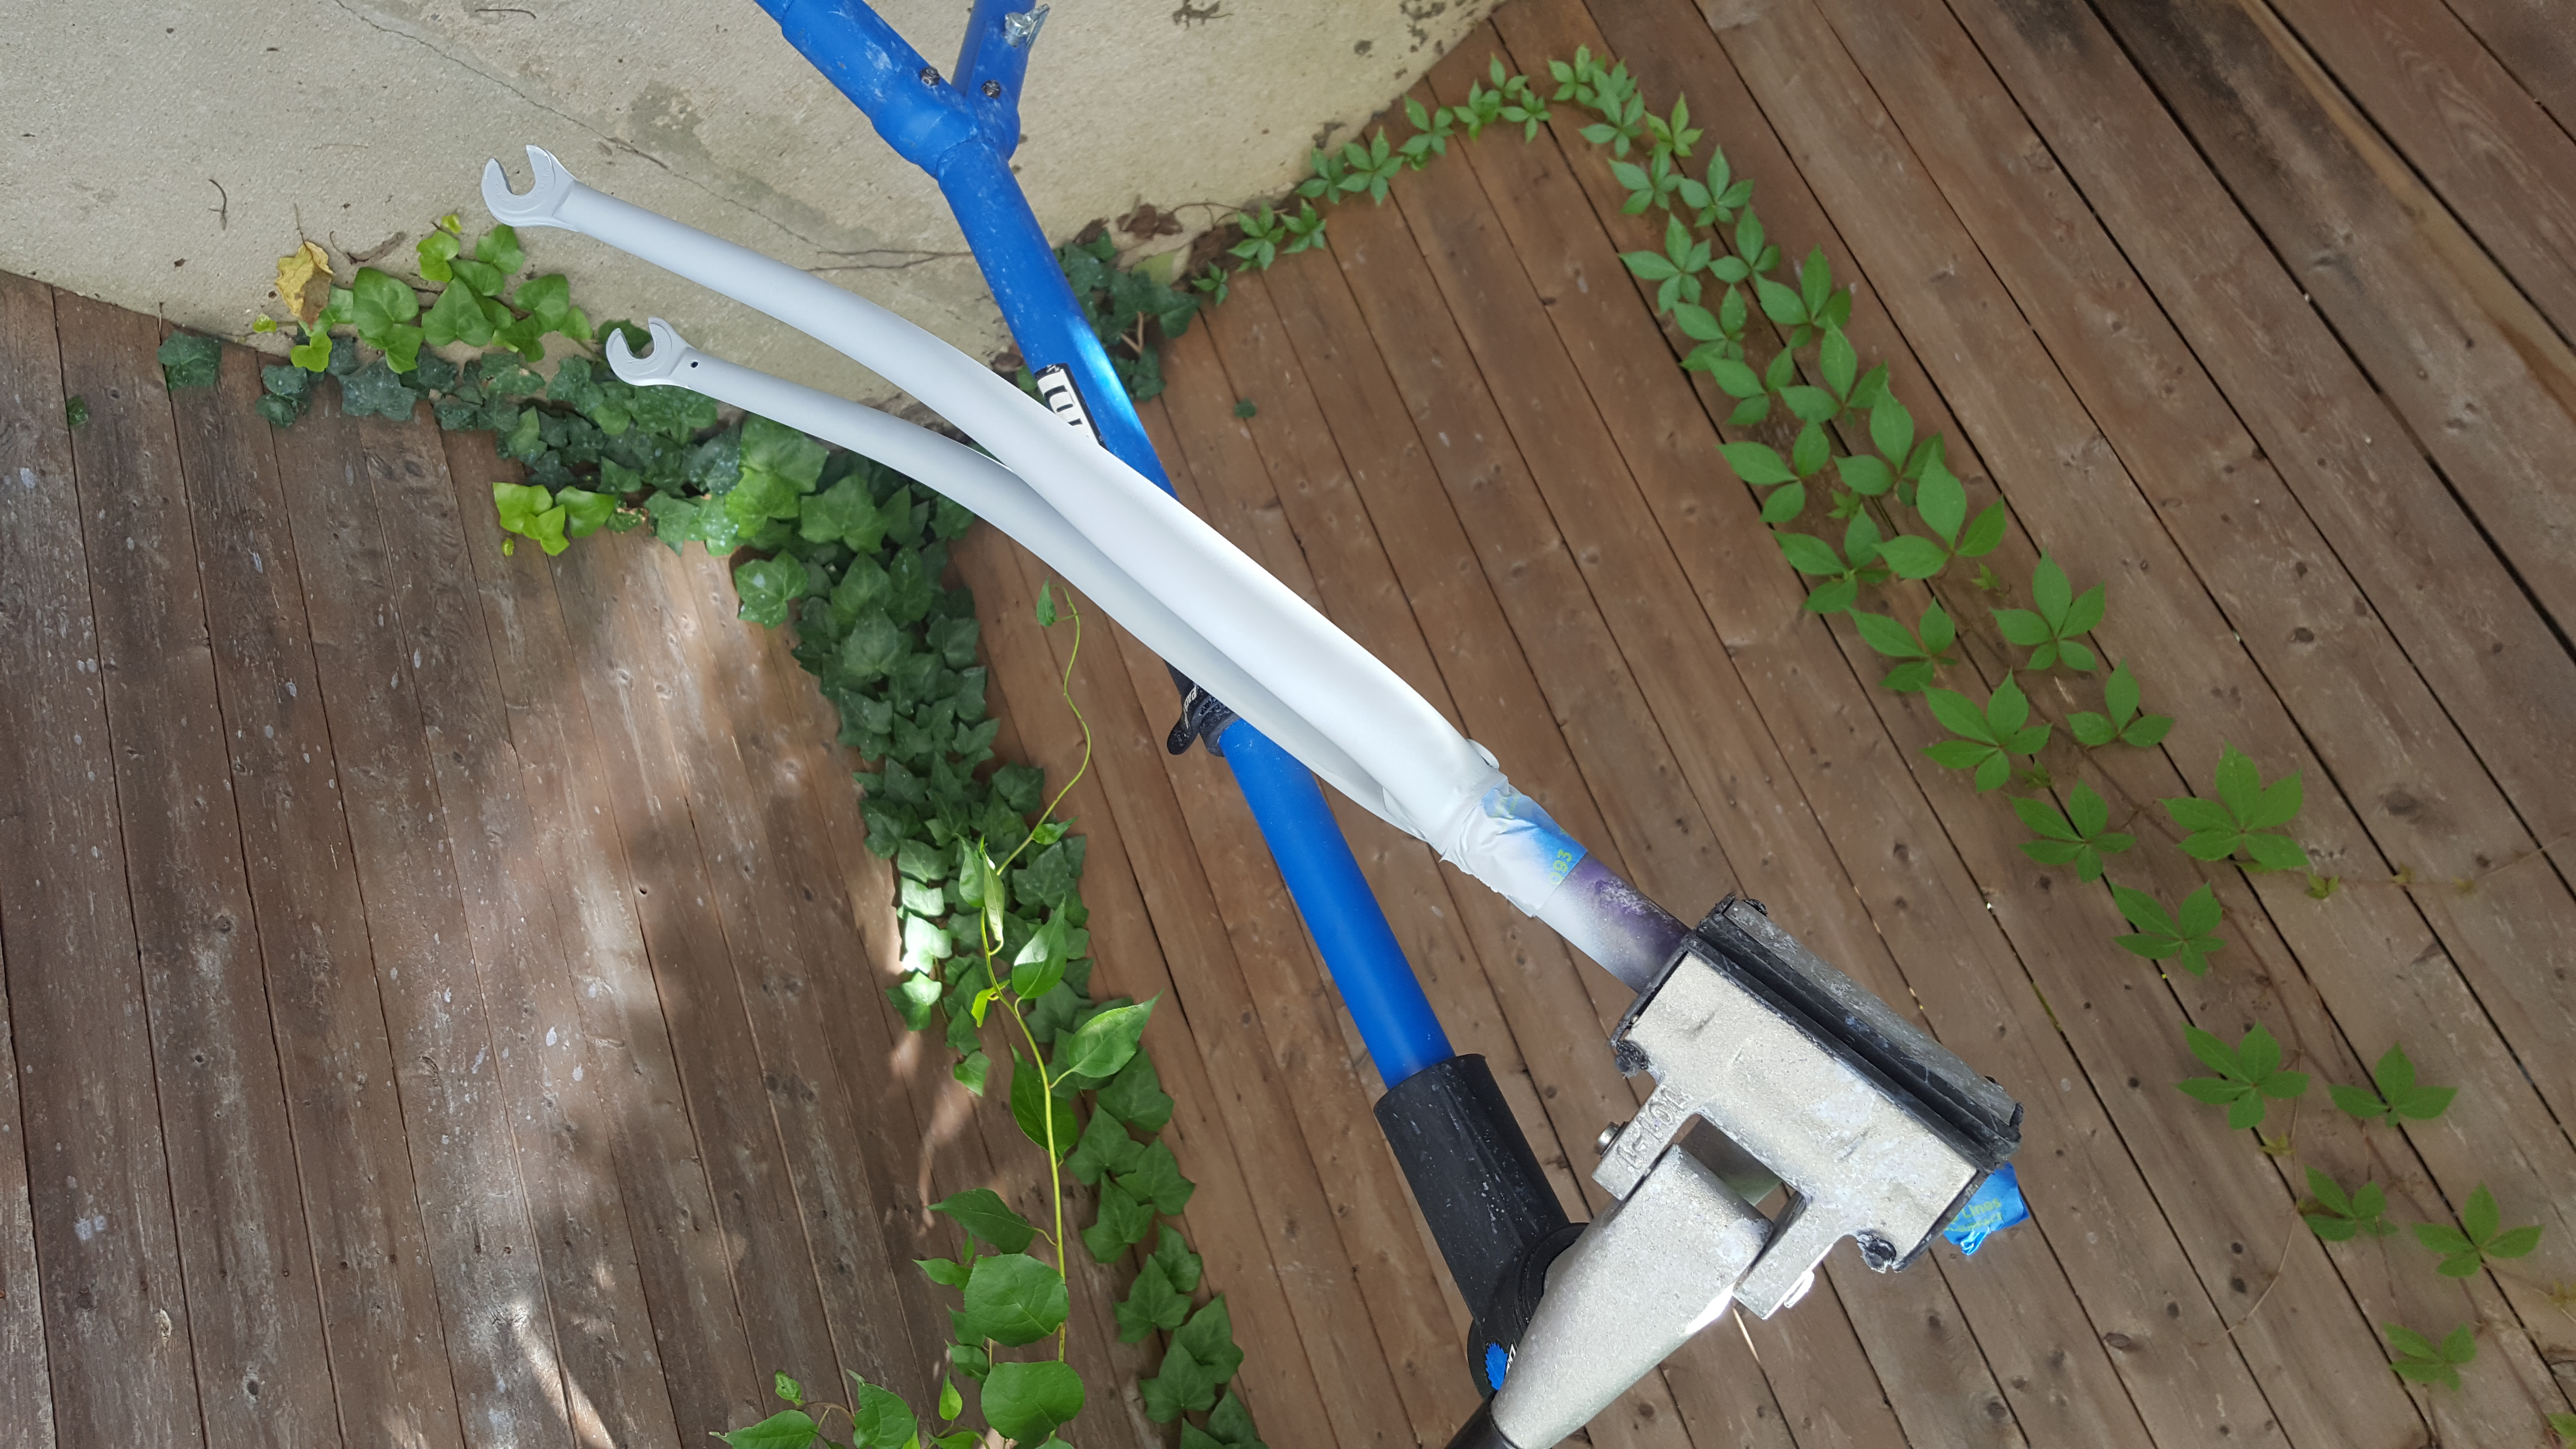 The bicycle fork is clamped by the steerer tube in a blue bike-stand. white-ish primer has recently been applied to the fork crown and stays. In the background is a fence with ivy on it.